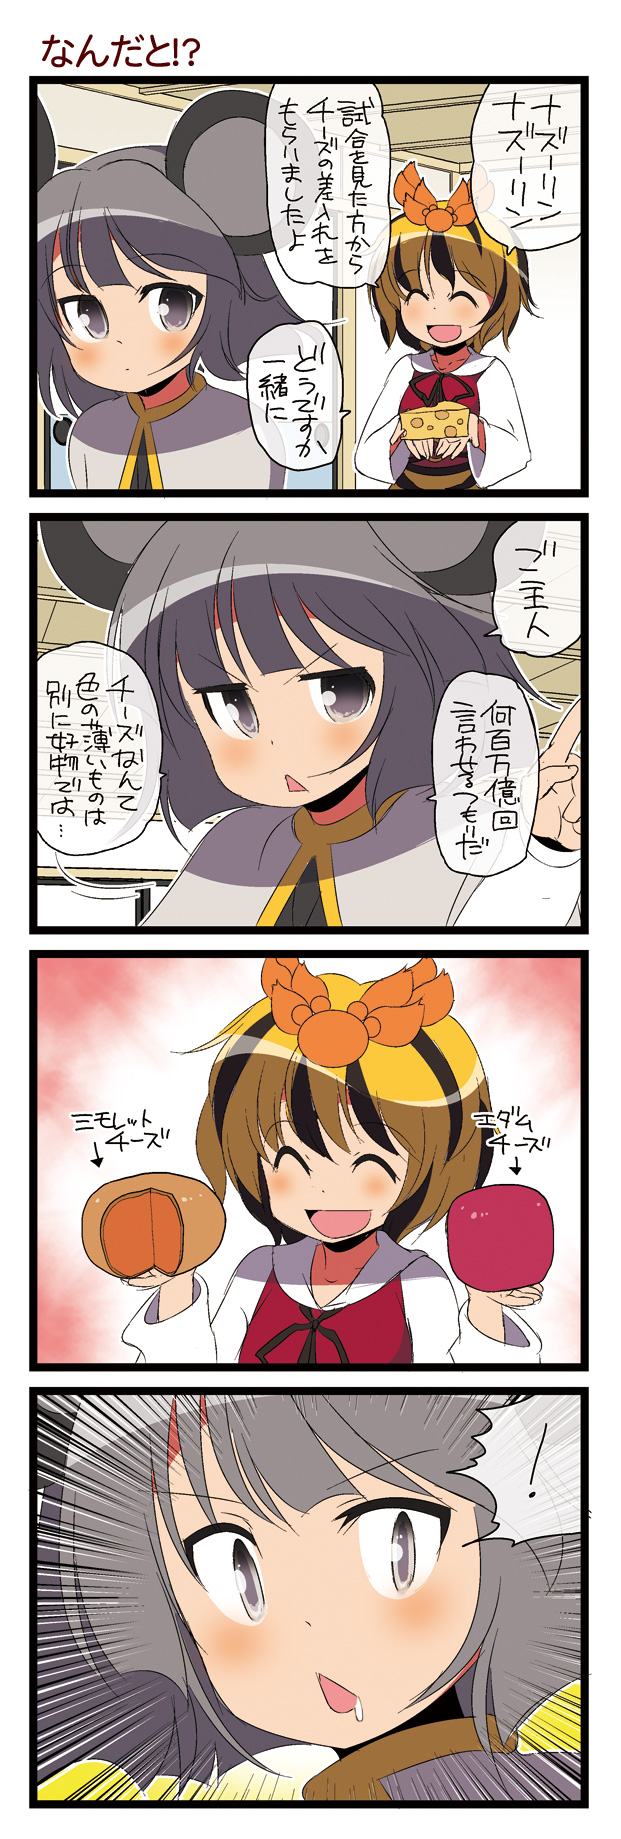 2girls 4koma :&lt; animal_ears blonde_hair blush brown_hair capelet cheese closed_eyes comic dei_shirou drooling eyes_closed grey_eyes grey_hair hair_ornament highres mouse_ears multicolored_hair multiple_girls nazrin open_mouth shirt short_hair smile tiger_print toramaru_shou touhou translated translation_request tsundere two-tone_hair